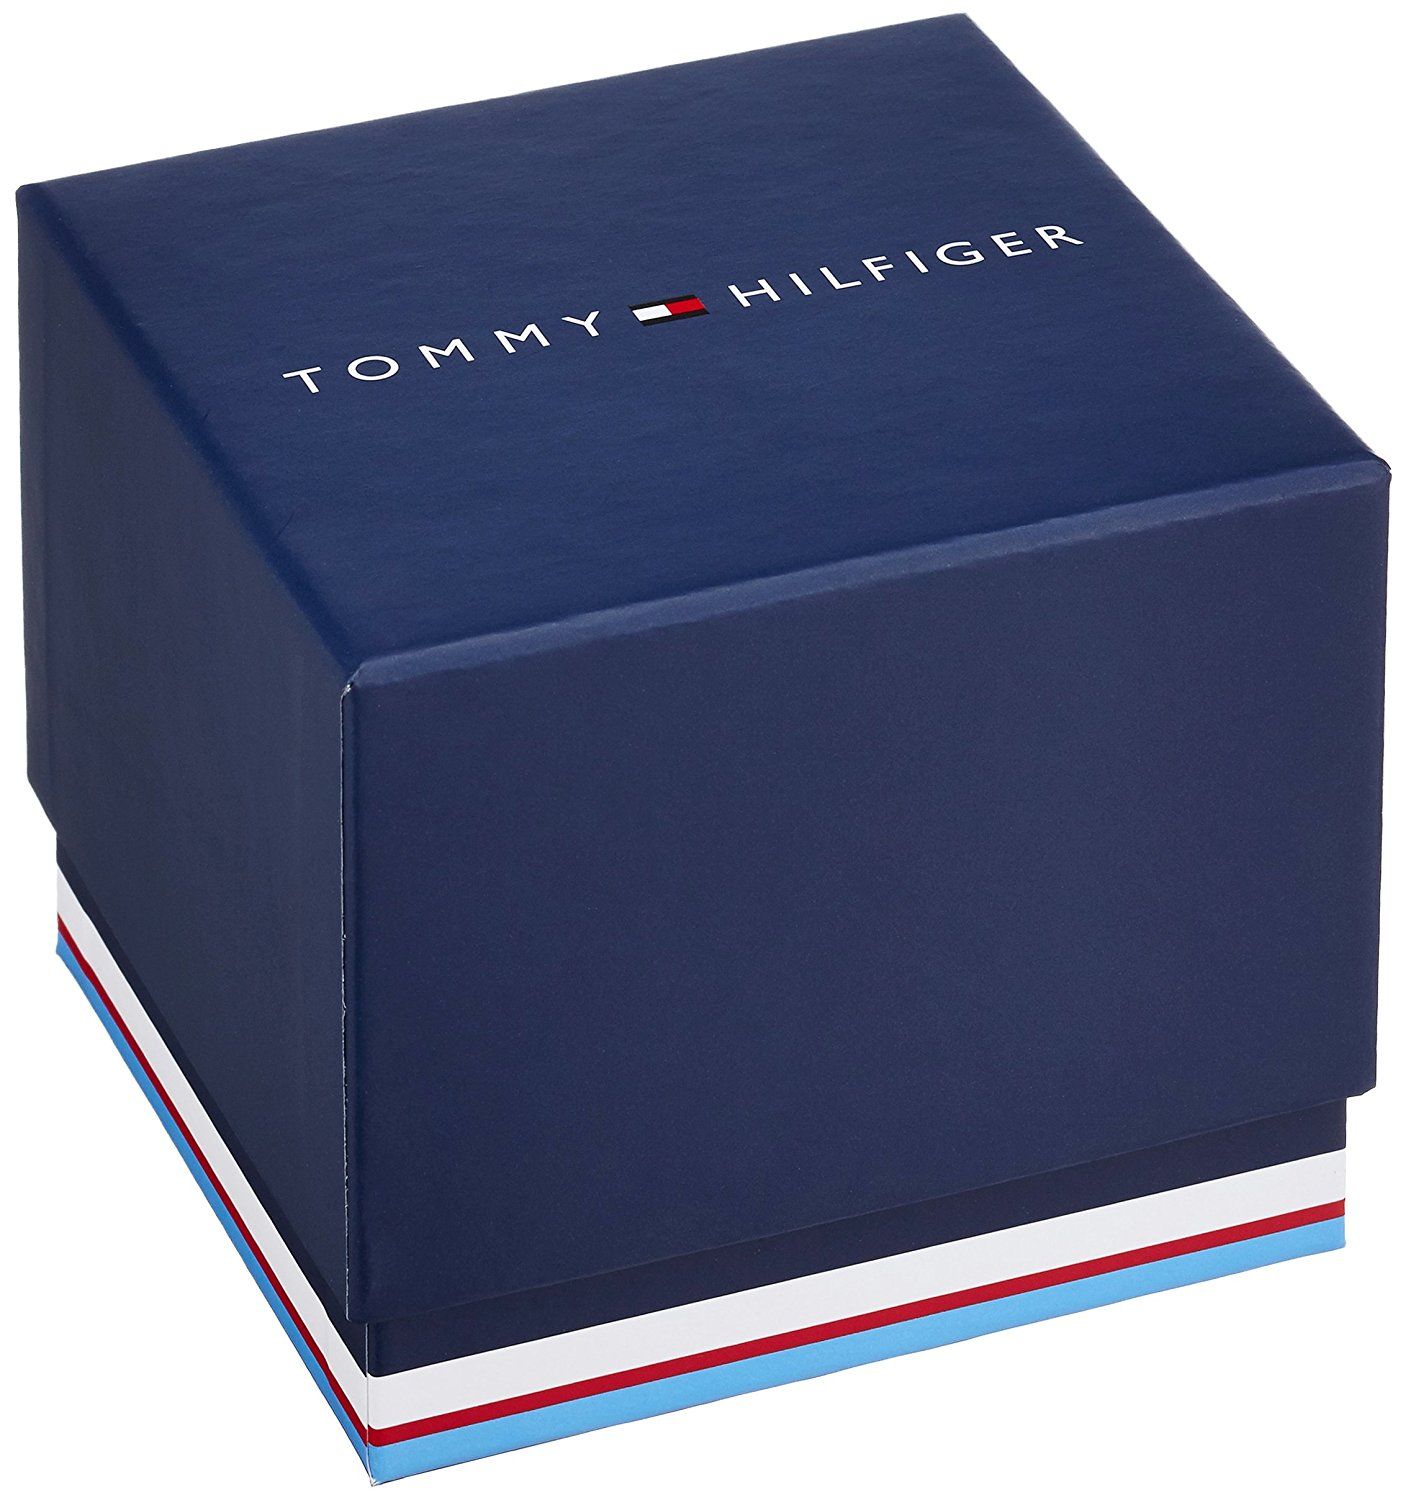 This Tommy Hilfiger Mason Multi Dial Watch for Men is the perfect timepiece to wear or to gift. It's Silver 45 mm Round case combined with the comfortable Silver Stainless steel watch band will ensure you enjoy this stunning timepiece without any compromise. Operated by a high quality Quartz movement and water resistant to 5 bars, your watch will keep ticking. This fashionable watch with numbers on the bezel is a perfect gift for New Year, birthday,valentine's day and so on-The watch has a calendar function: Day-Date, 24-hour Display High quality 21 cm length and 20 mm width Silver Stainless steel strap with a Fold over with push button clasp Case diameter: 45 mm,case thickness: 10 mm, case colour: Silver and dial colour: Black